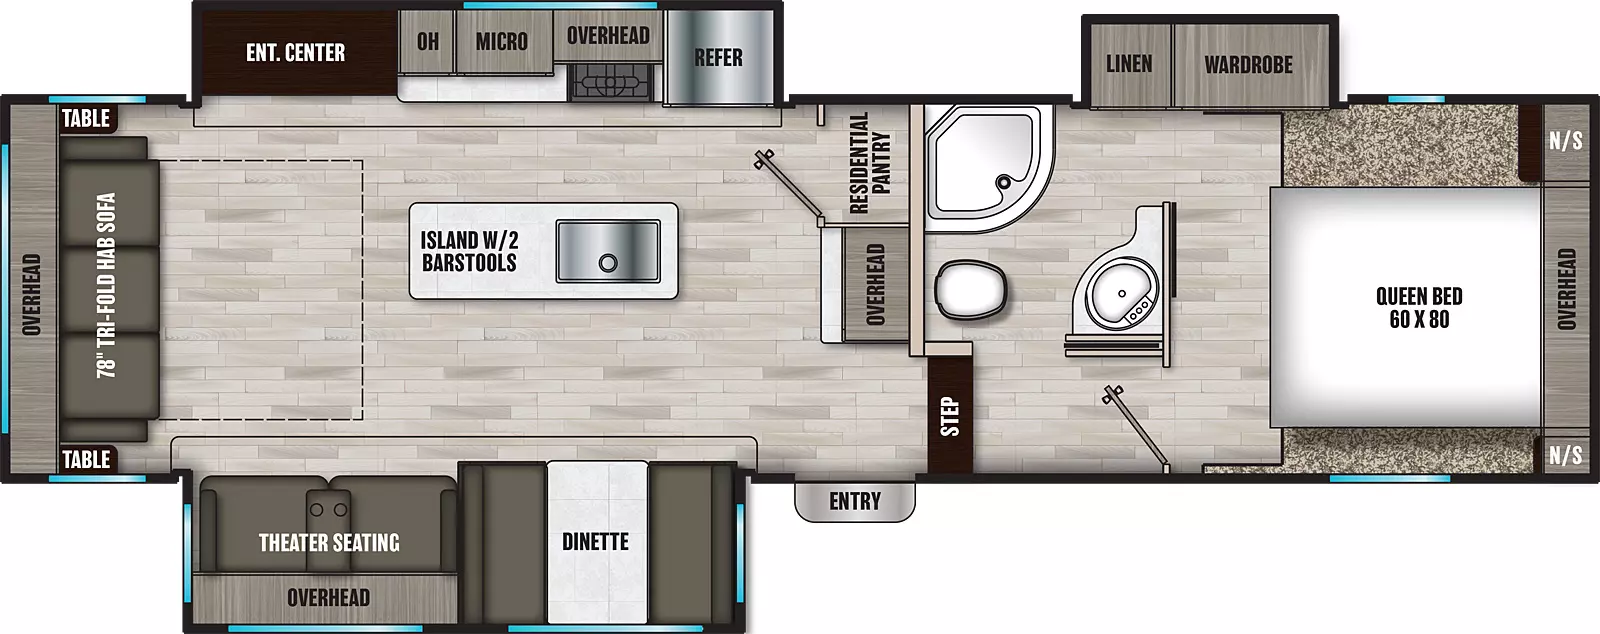 The 30RLS has three slideouts and one entry. Interior layout front to back: front bedroom with foot facing queen bed with overhead cabinet and night stands on each side, and off-door side slideout with wardrobe and linen cabinet; off-door side full pass-through bathroom; step down to main living area and entry; counter with overhead cabinet and residential pantry along inner wall; kitchen island with two bar stools and sink; off-door side slideout with refrigerator, overhead cabinet, microwave, kitchen counter, and entertainment center; door side dinette, and theater seating with overhead cabinet; rear tri-fold hide-a-bed sofa with overhead cabinet and tables on each side.